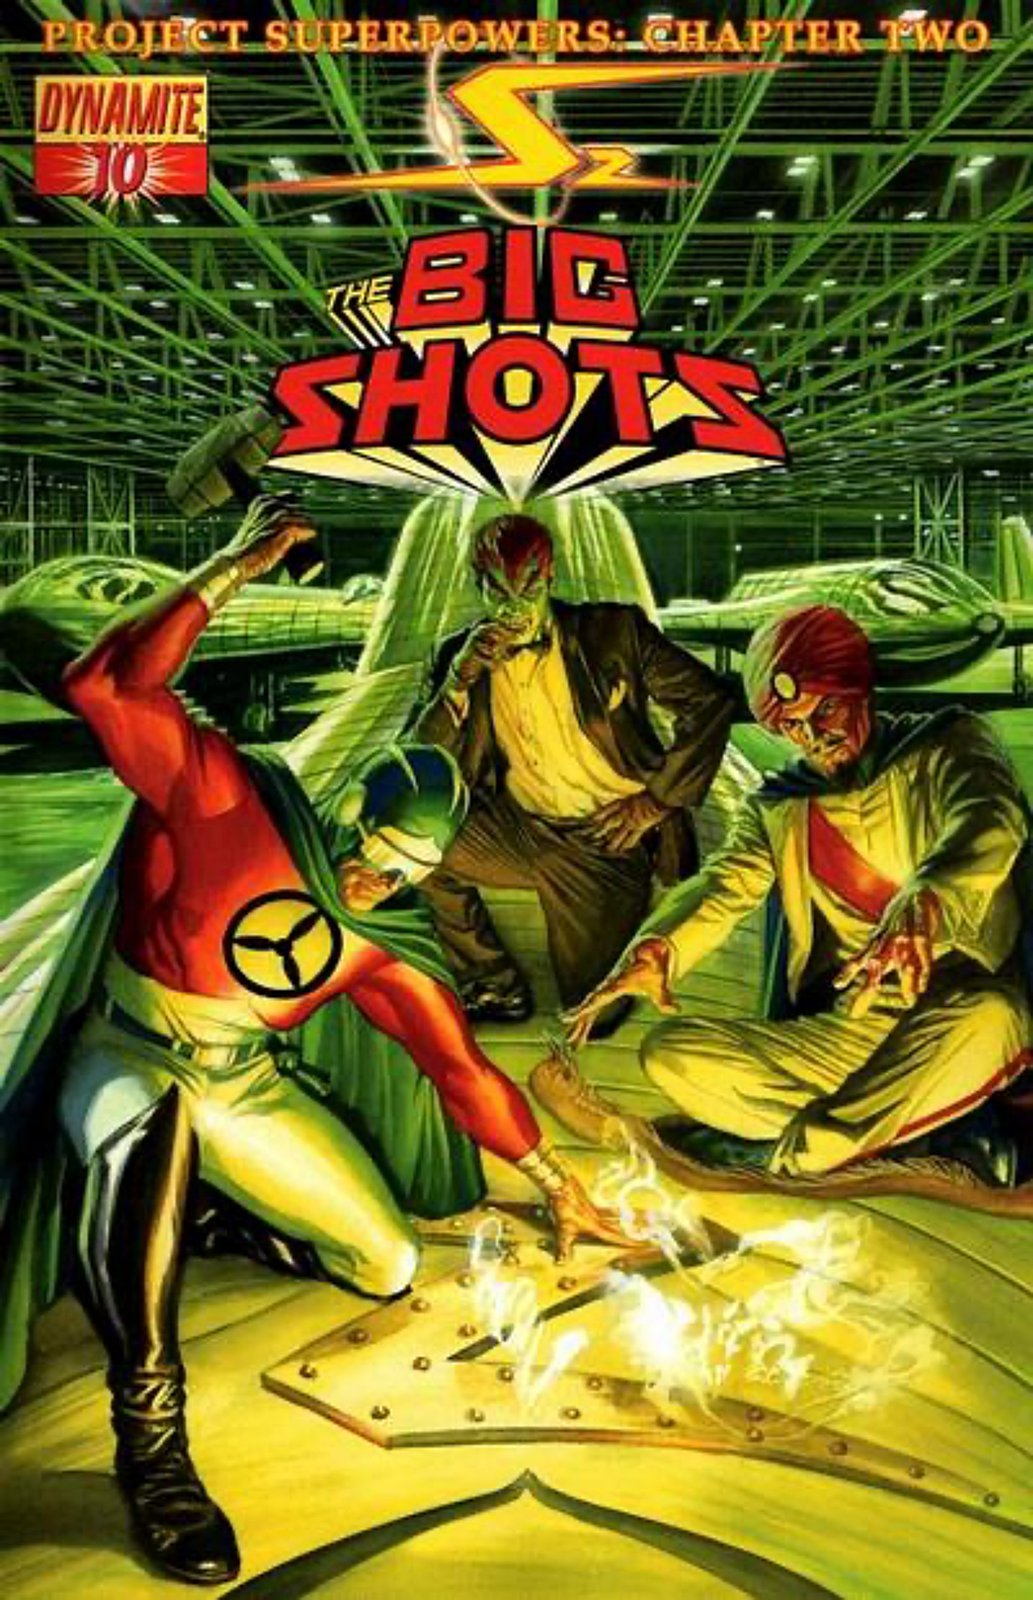 Project Superpowers: Chapter Two #10A Alex Ross Cover (2009) Dynamite Comics